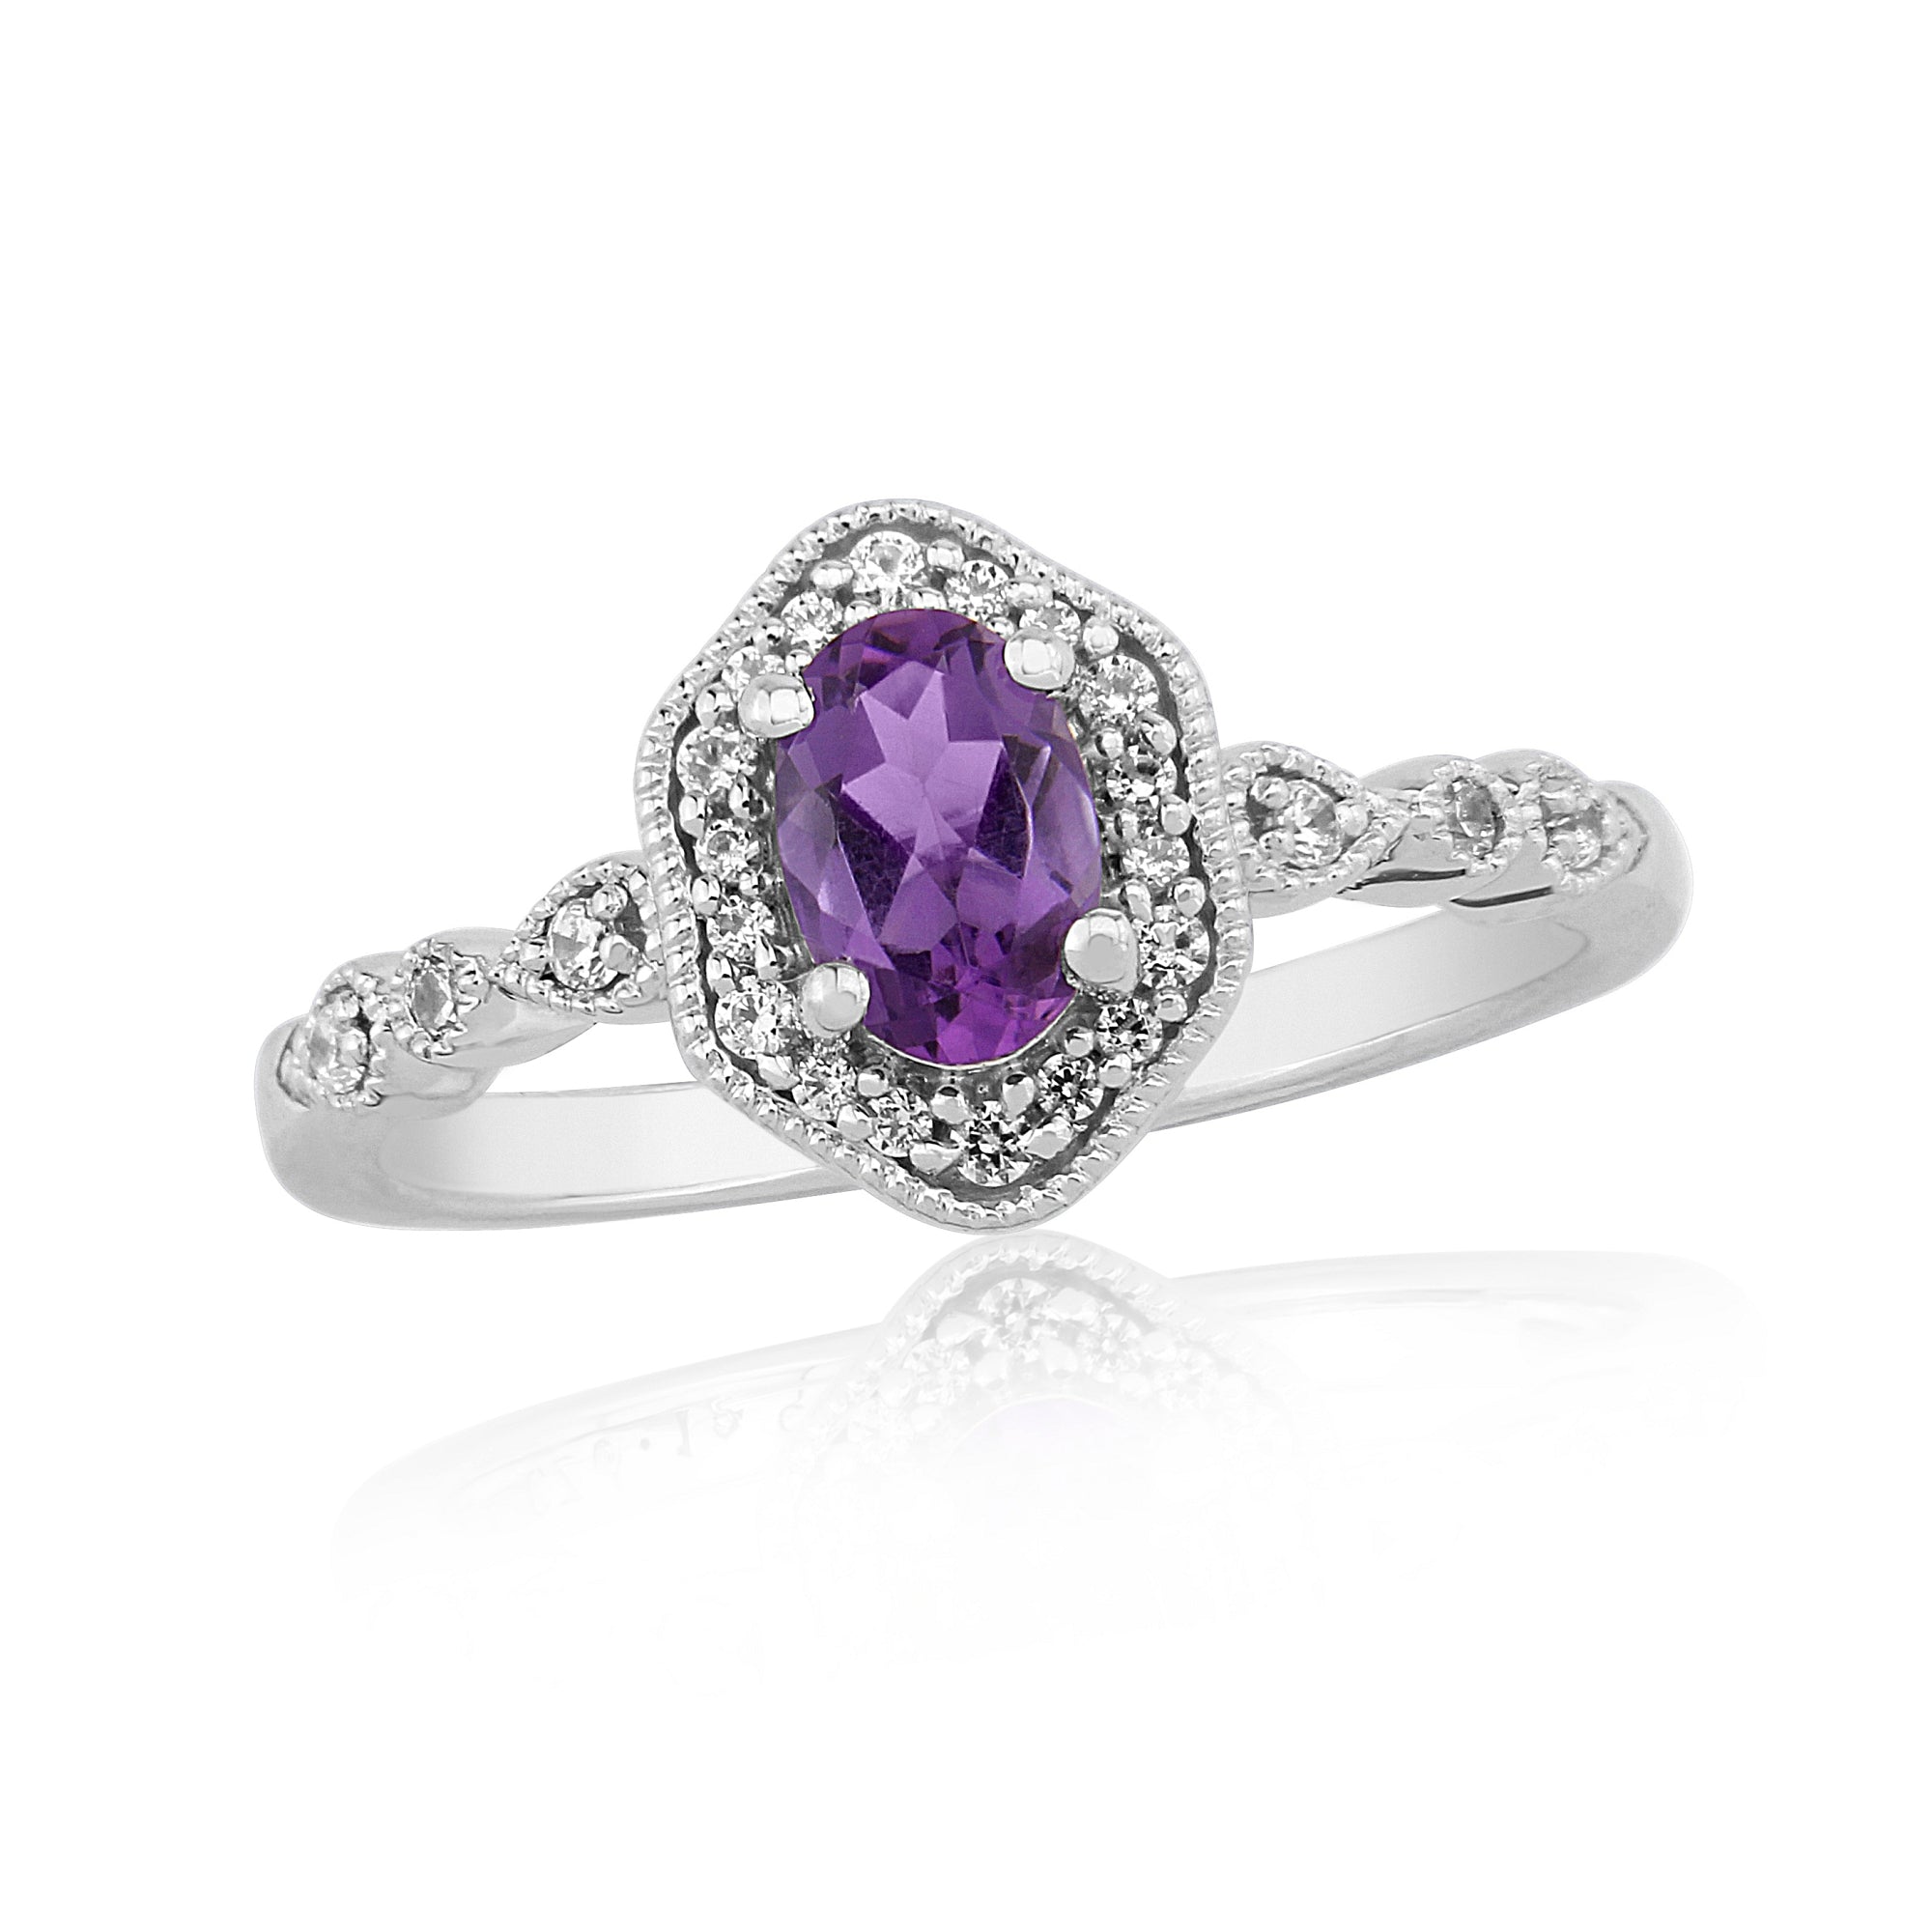 9ct white gold 6x4mm oval amethyst & diamond cluster ring 0.12ct